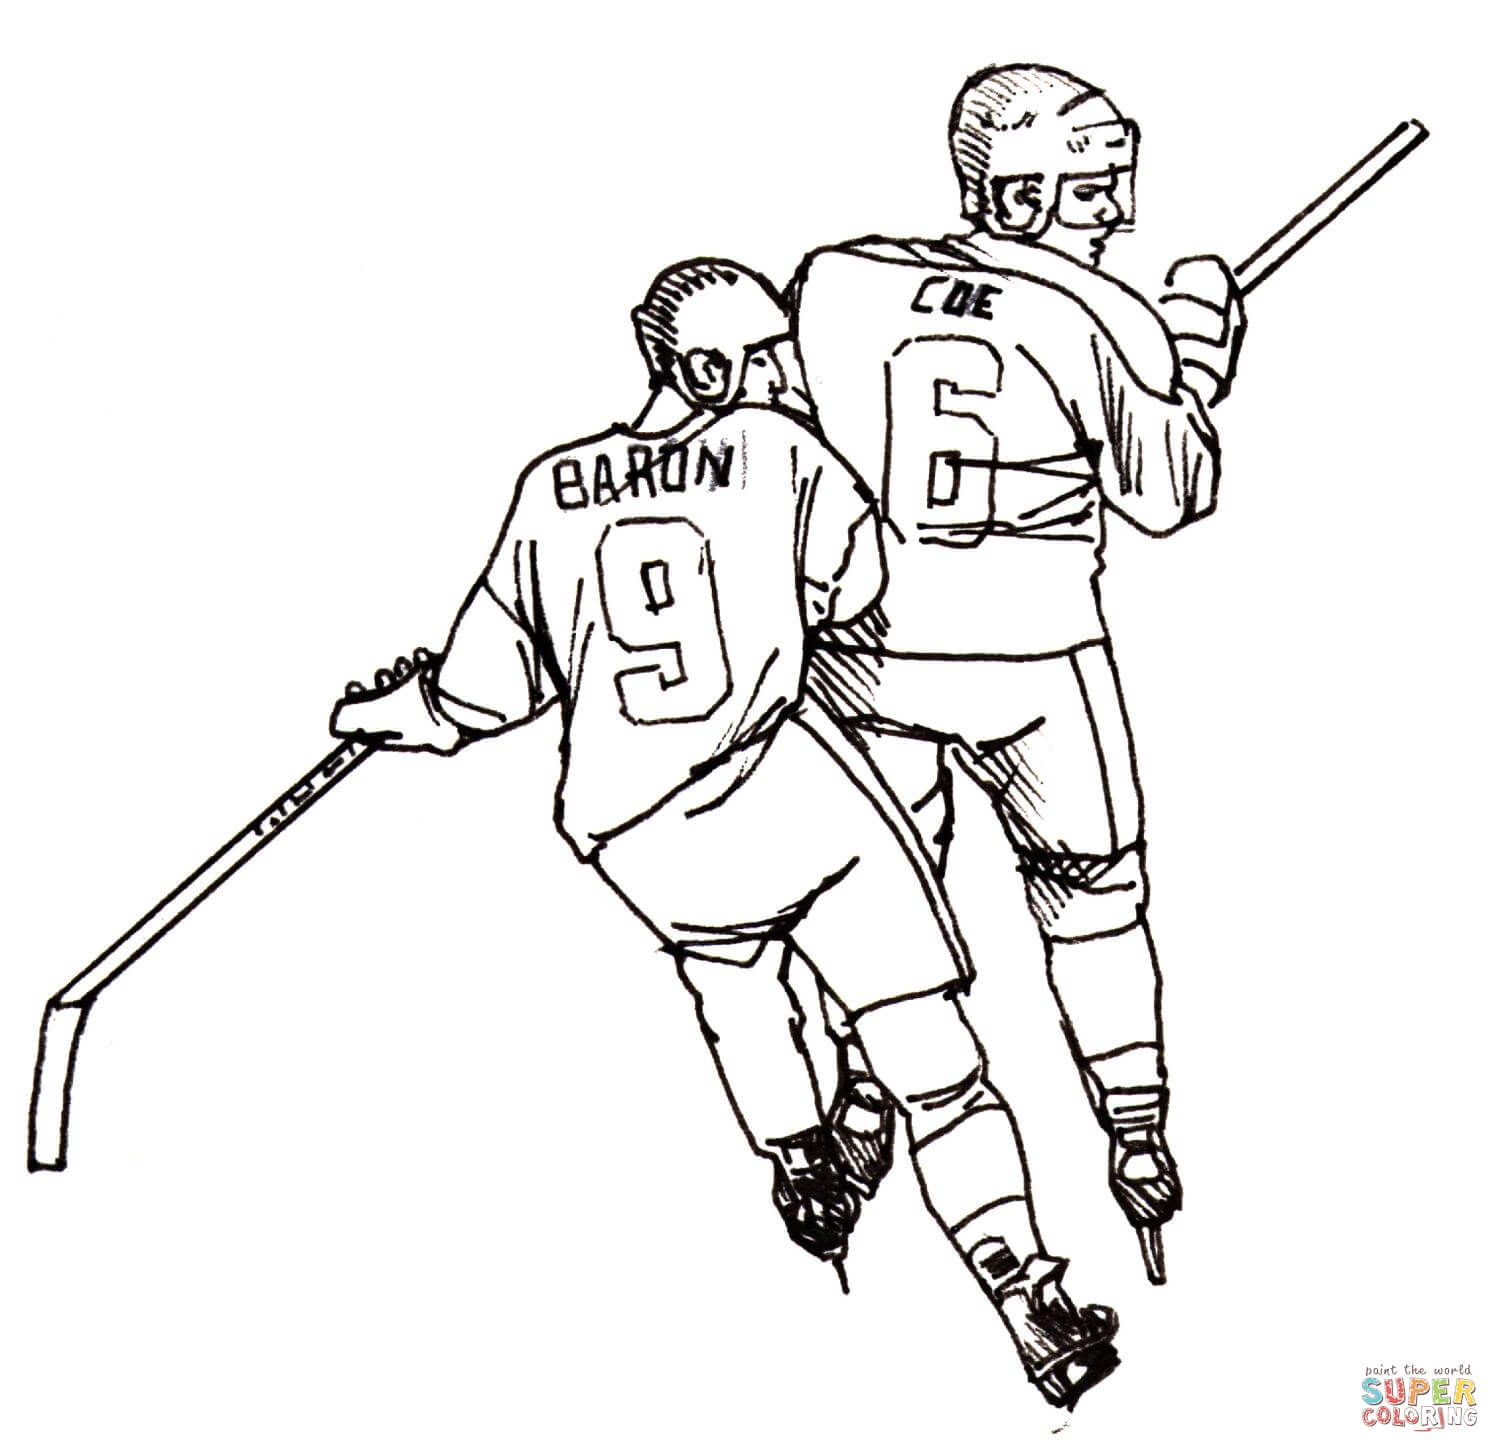 Boston Bruins Coloring Pages at GetColorings.com | Free printable